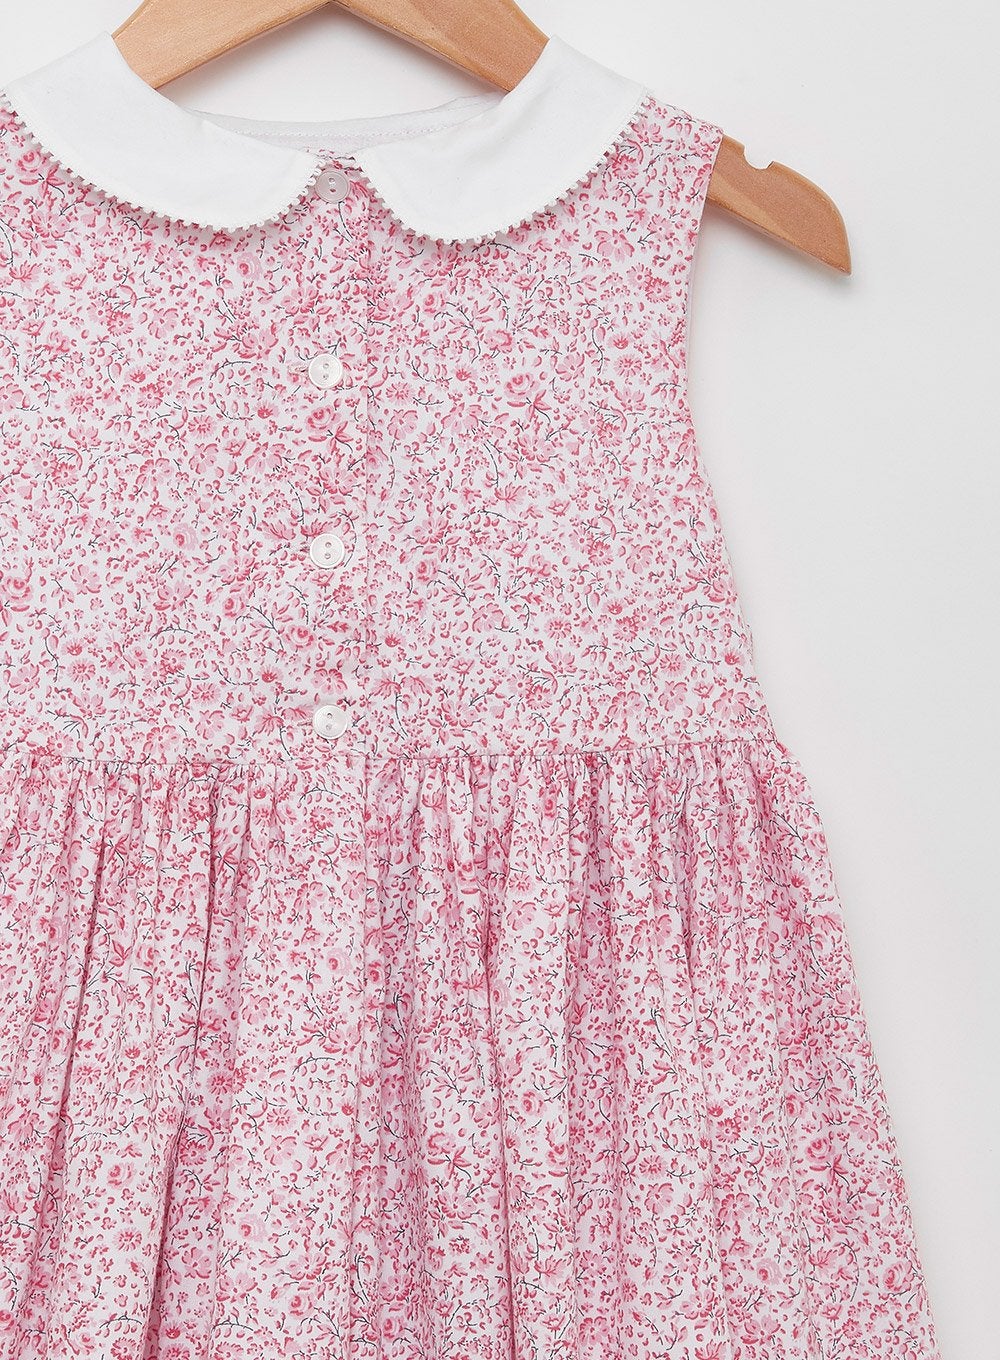 Confiture Dress Clara Button Dress in Pink Ditsy - Trotters Childrenswear